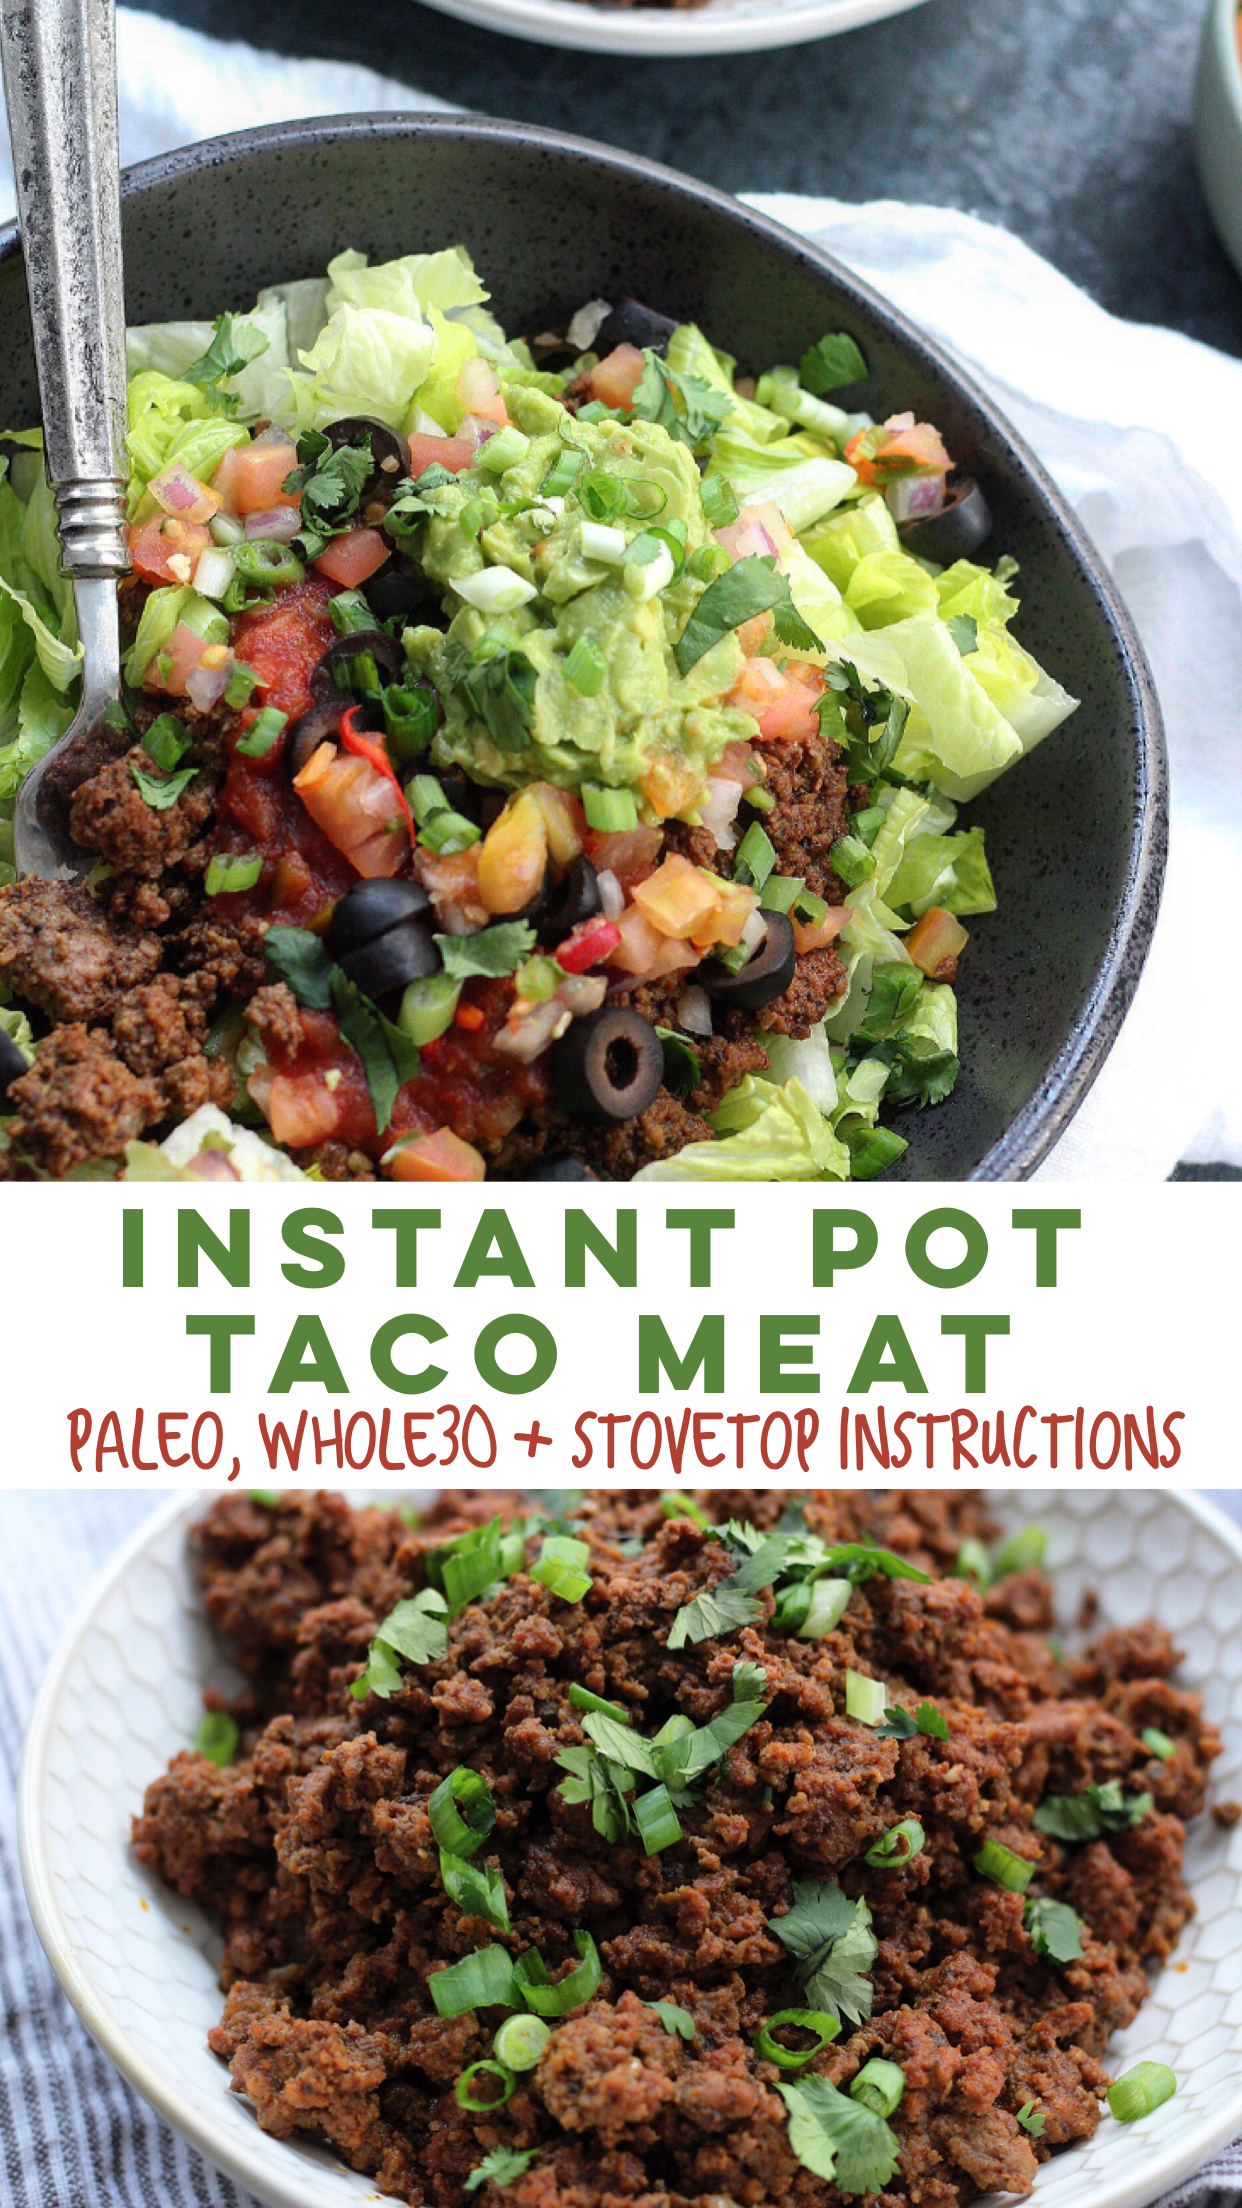 Quick Whole30 and Paleo instant pot taco meat that you can make in less than 20 minutes. Perfect for a low carb lunch, easy whole30 dinner or paleo meal prep! #whole30 #paleo #whole30beef #whole30instantpot